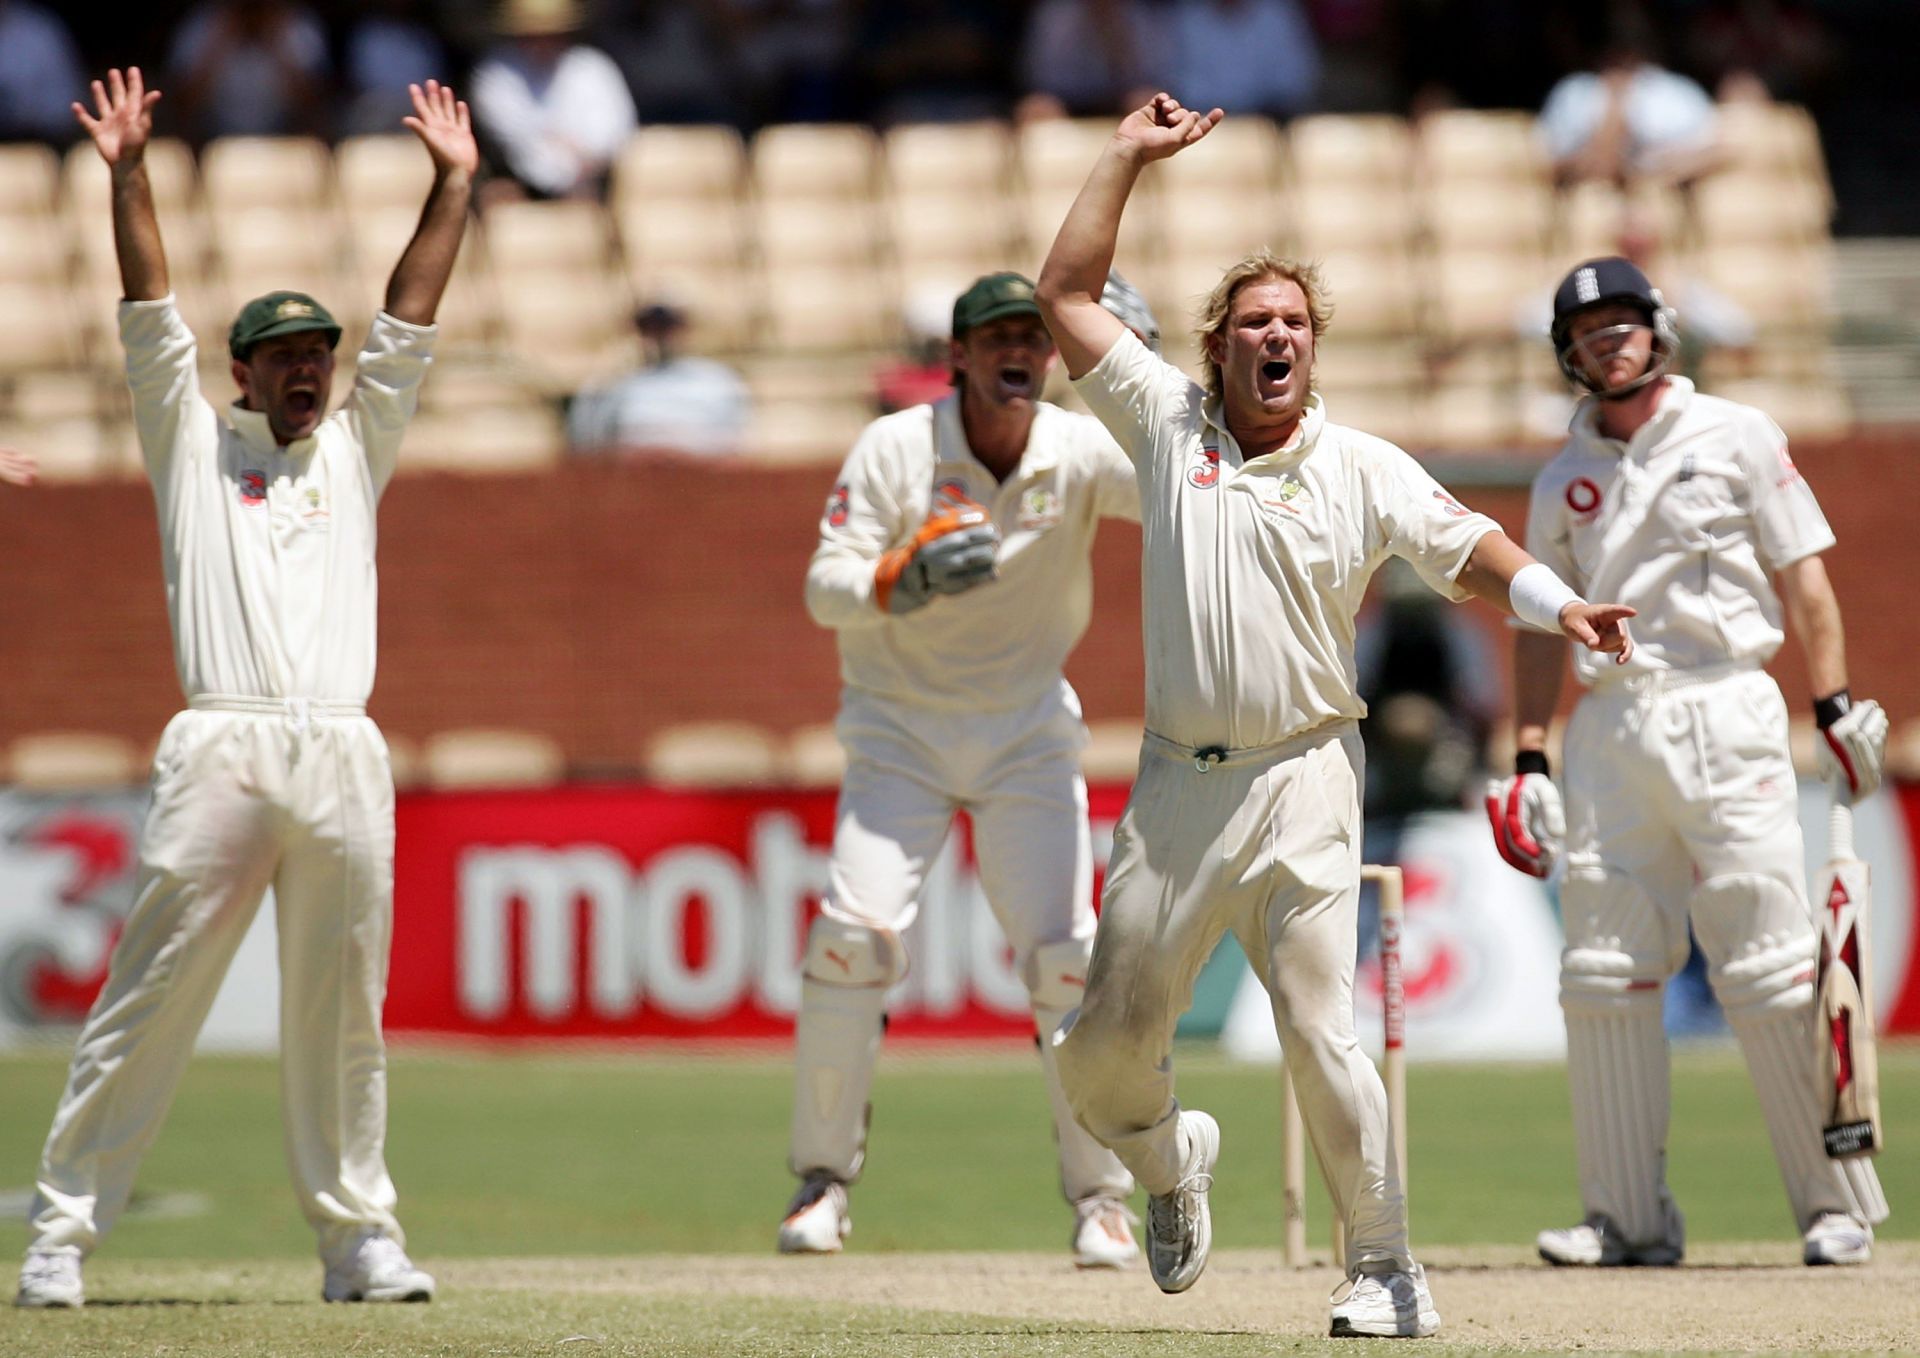 Shane Warne appeals for the wicket of Paul Collingwood. (Pic: Getty Images)